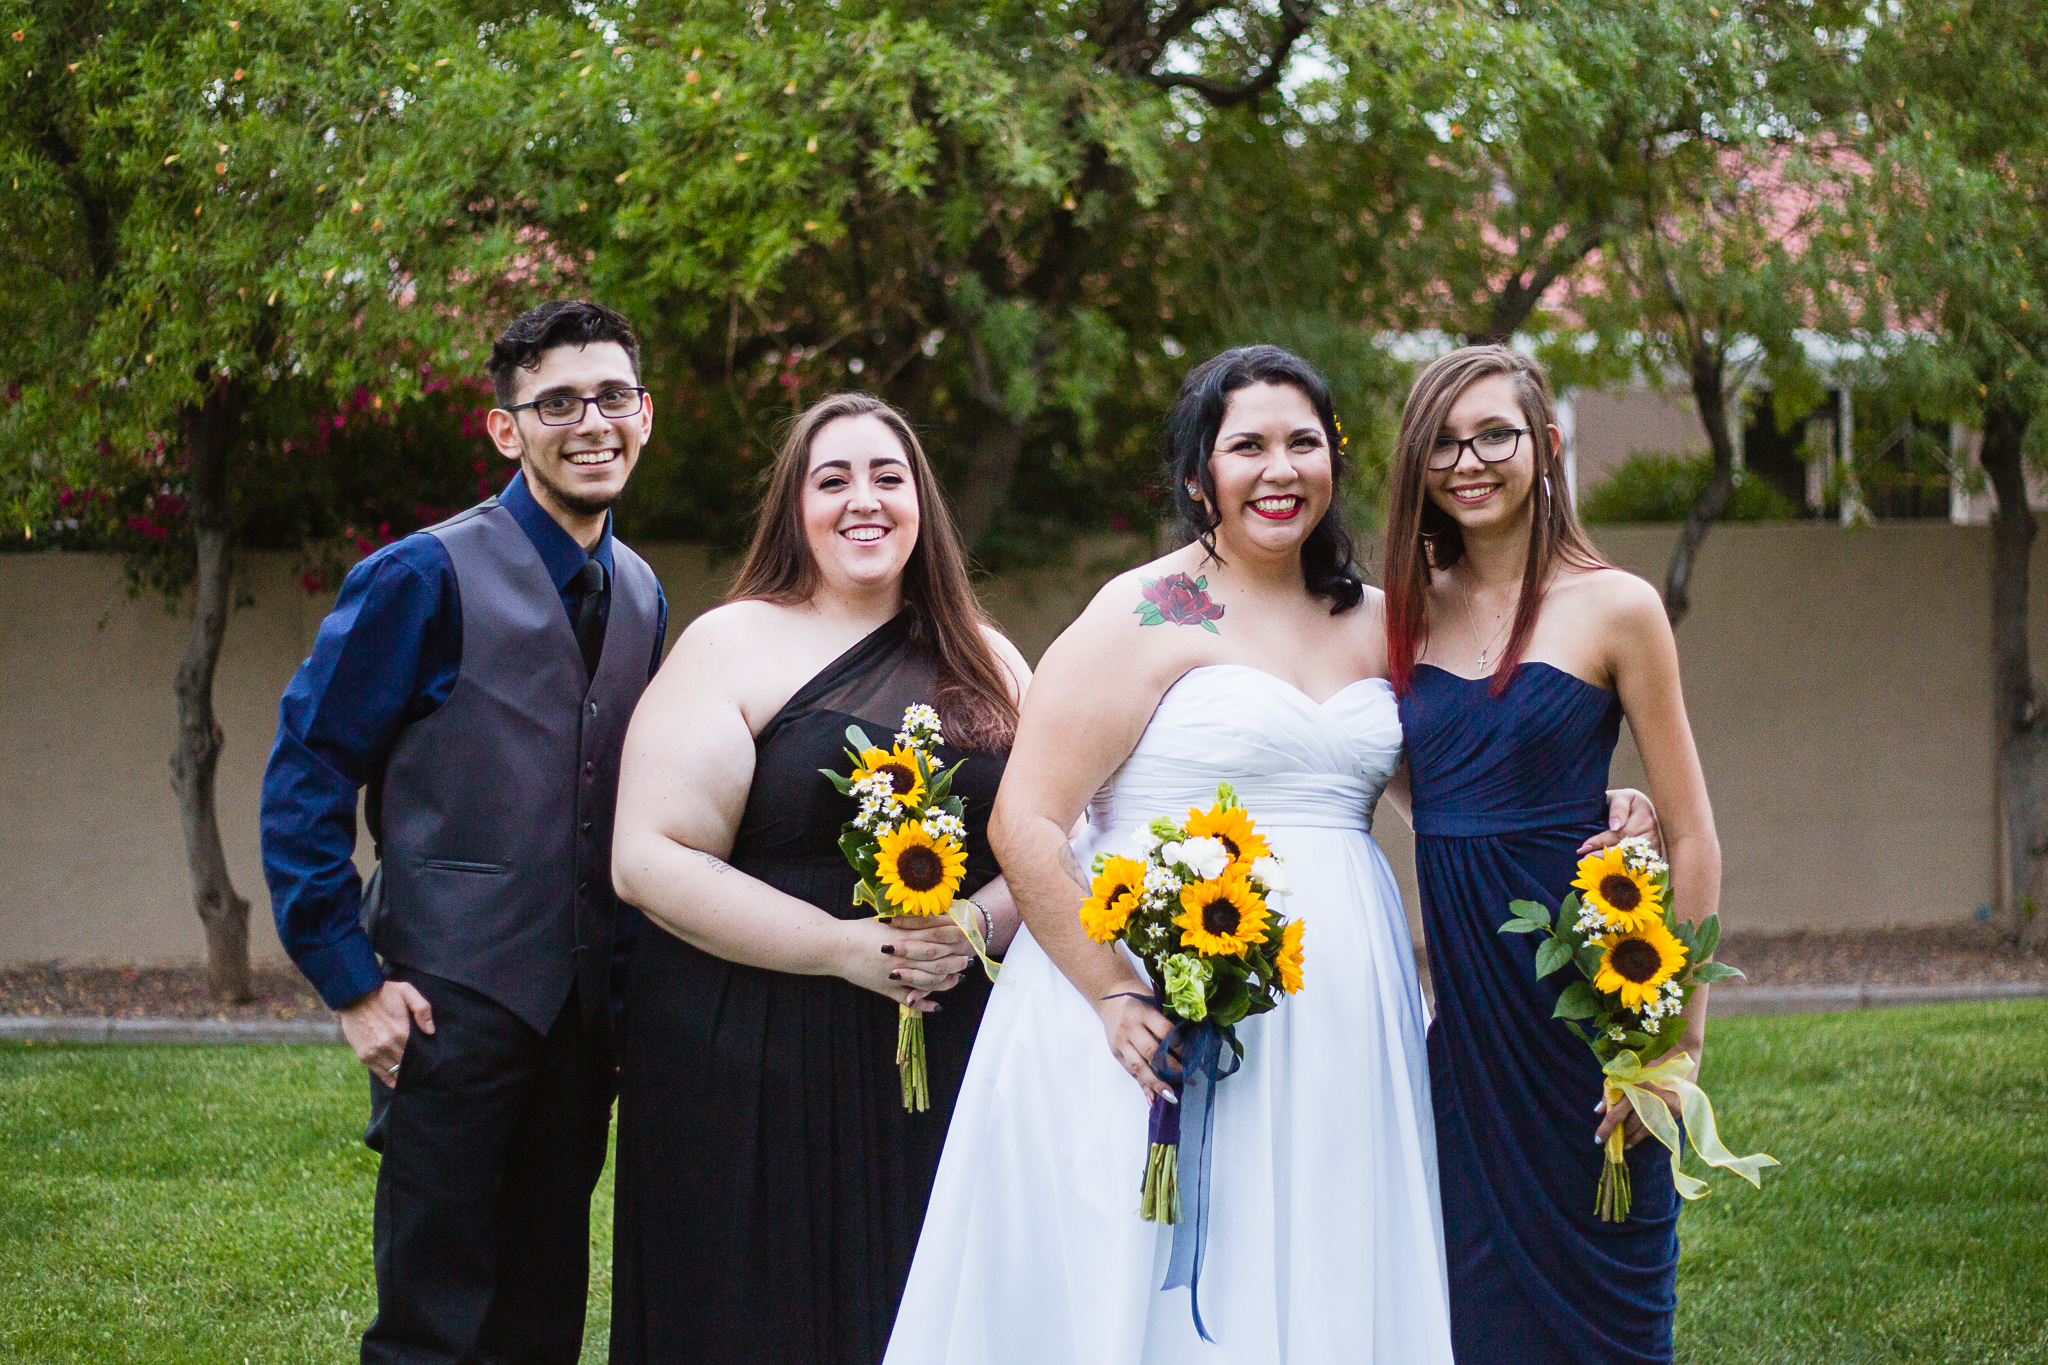 Bride with her mixed gender bridal party in black and navy outfits.